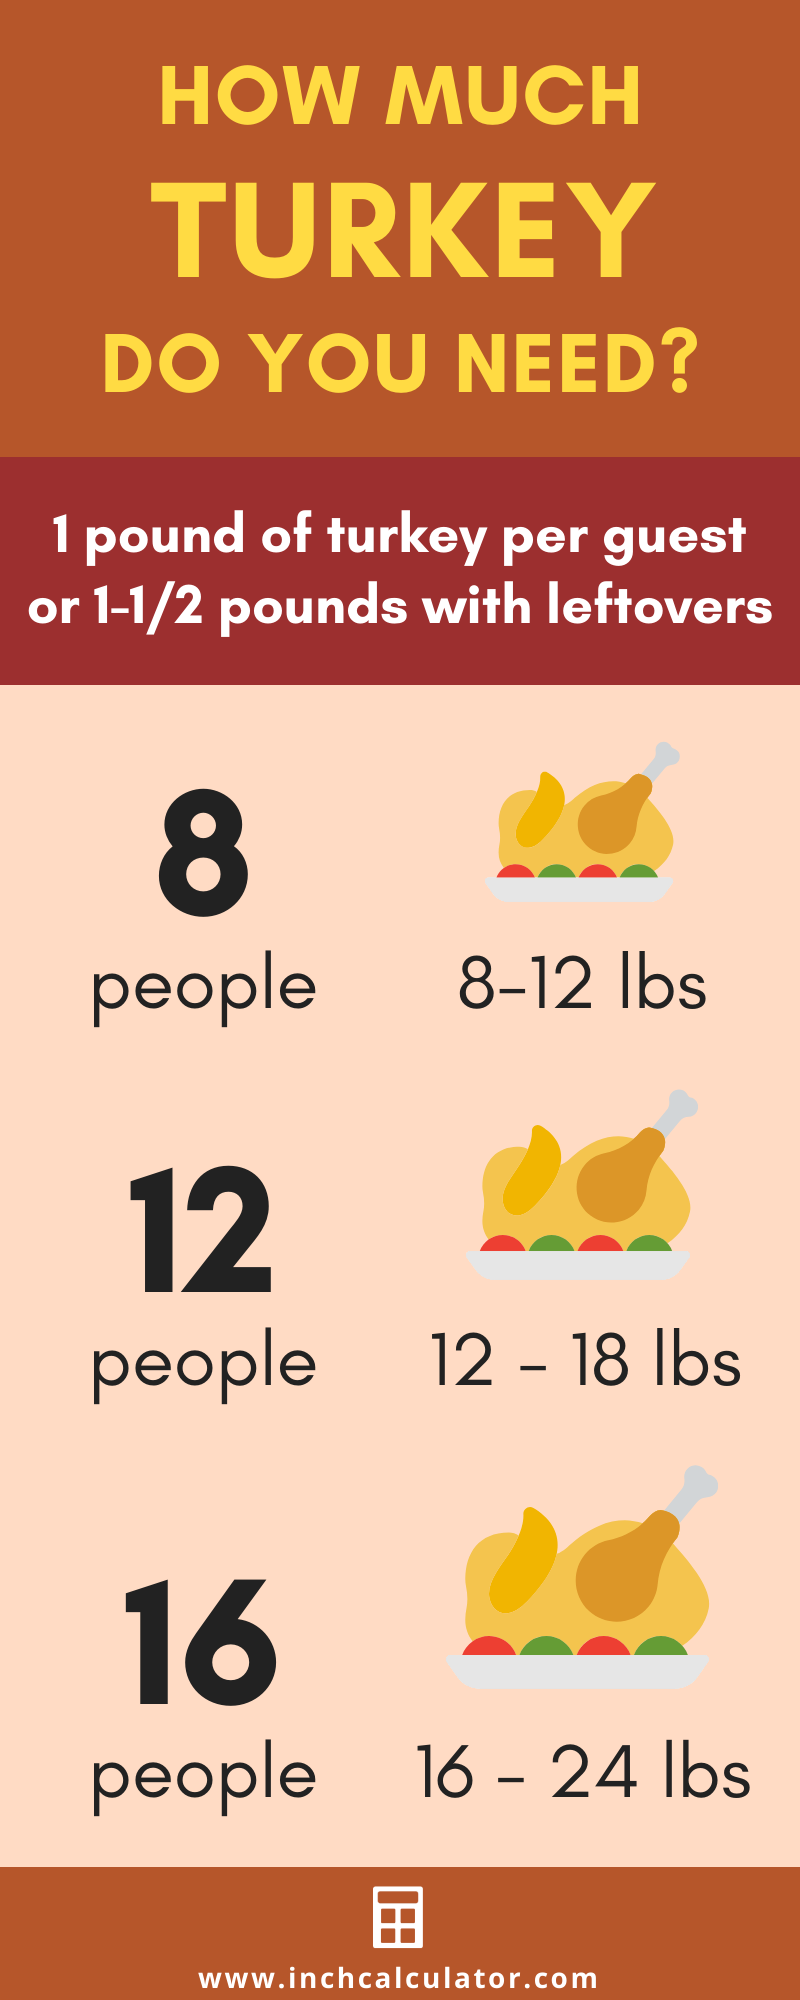 Infographic showing how much turkey you need for Thanksgiving dinner